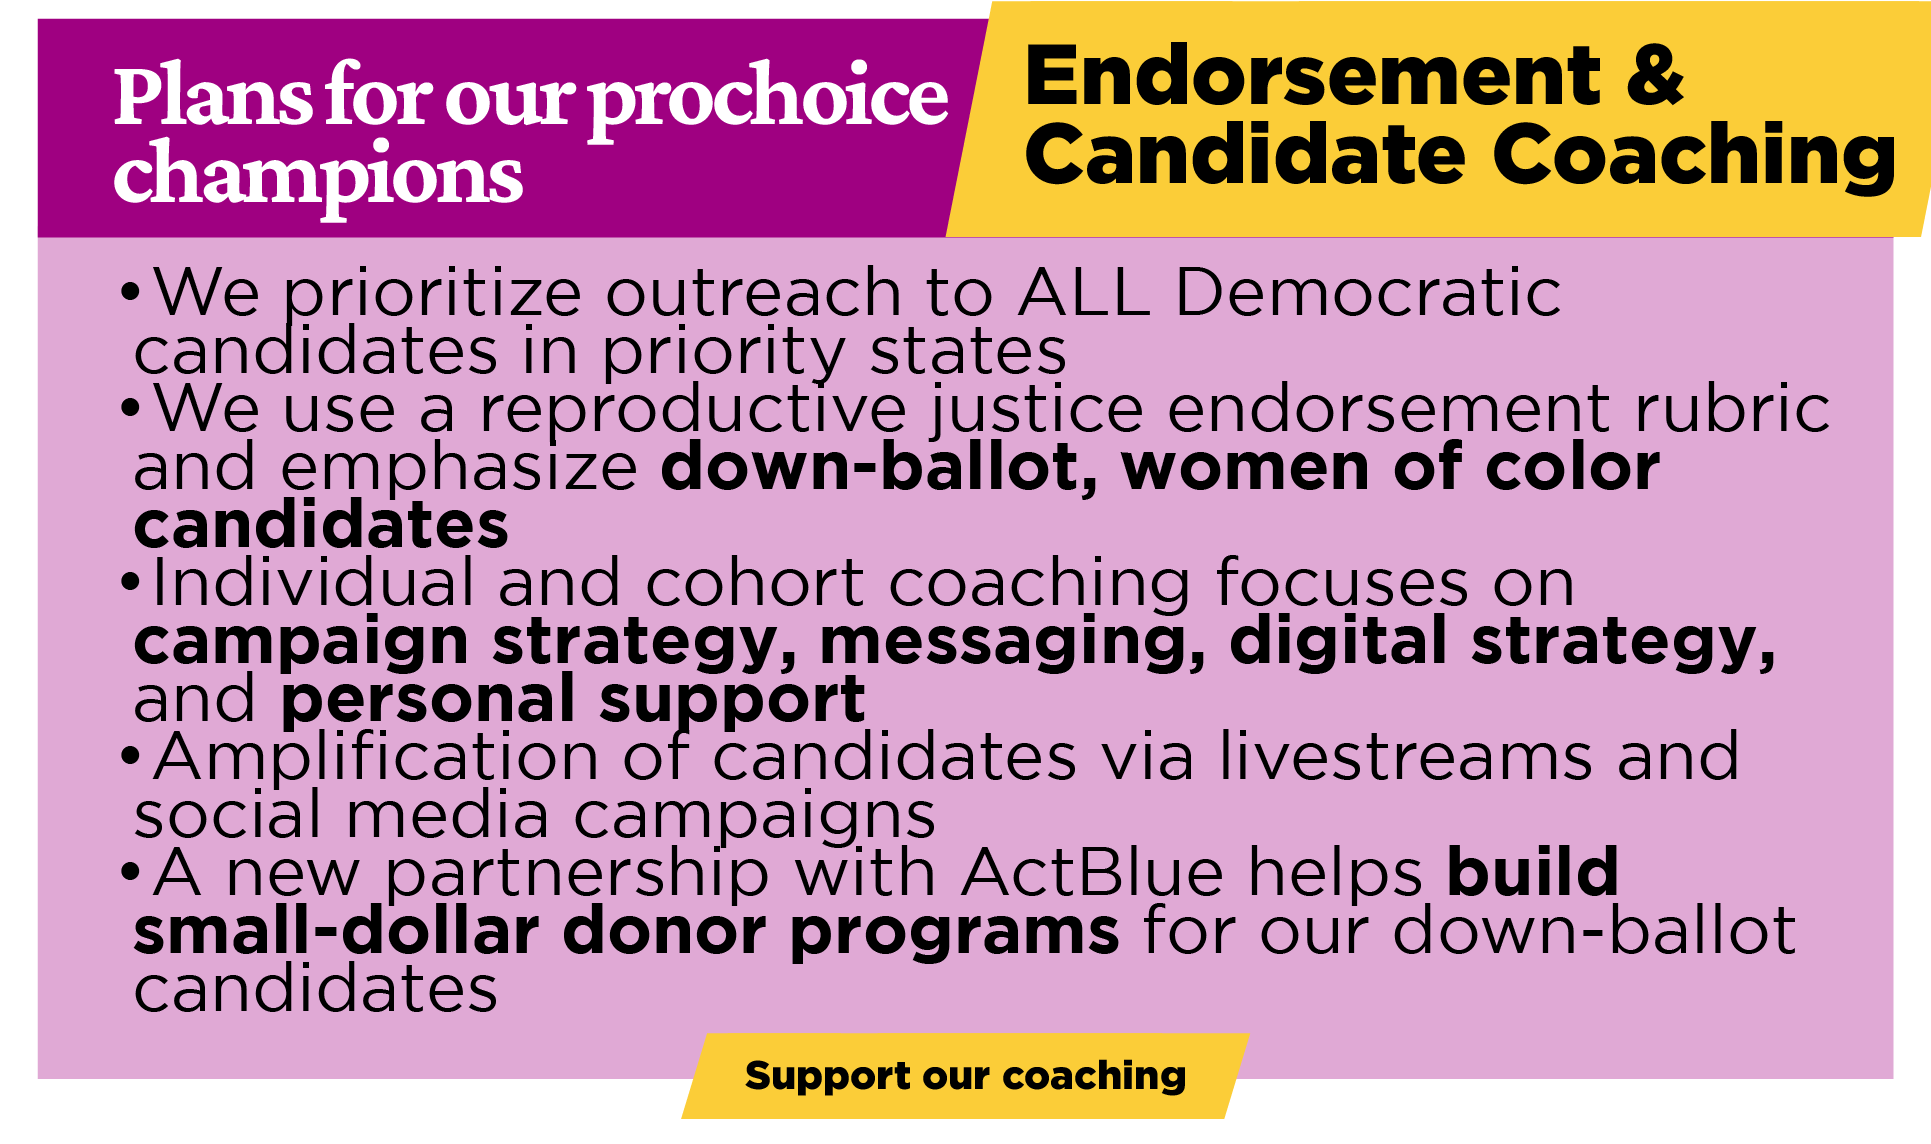 Endorsements and Candidate Coaching: We prioritize outreach to ALL Democratic candidates in priority states; We use a reproductive justice endorsement rubric and emphasize down-ballot, women of color candidates; Individual and cohort coaching focuses on campaign strategy, messaging, digital strategy, and personal support; Amplification of candidates via livestreams and social media campaigns; A new partnership with ActBlue helps build small-dollar donor programs for our down-ballot candidates.